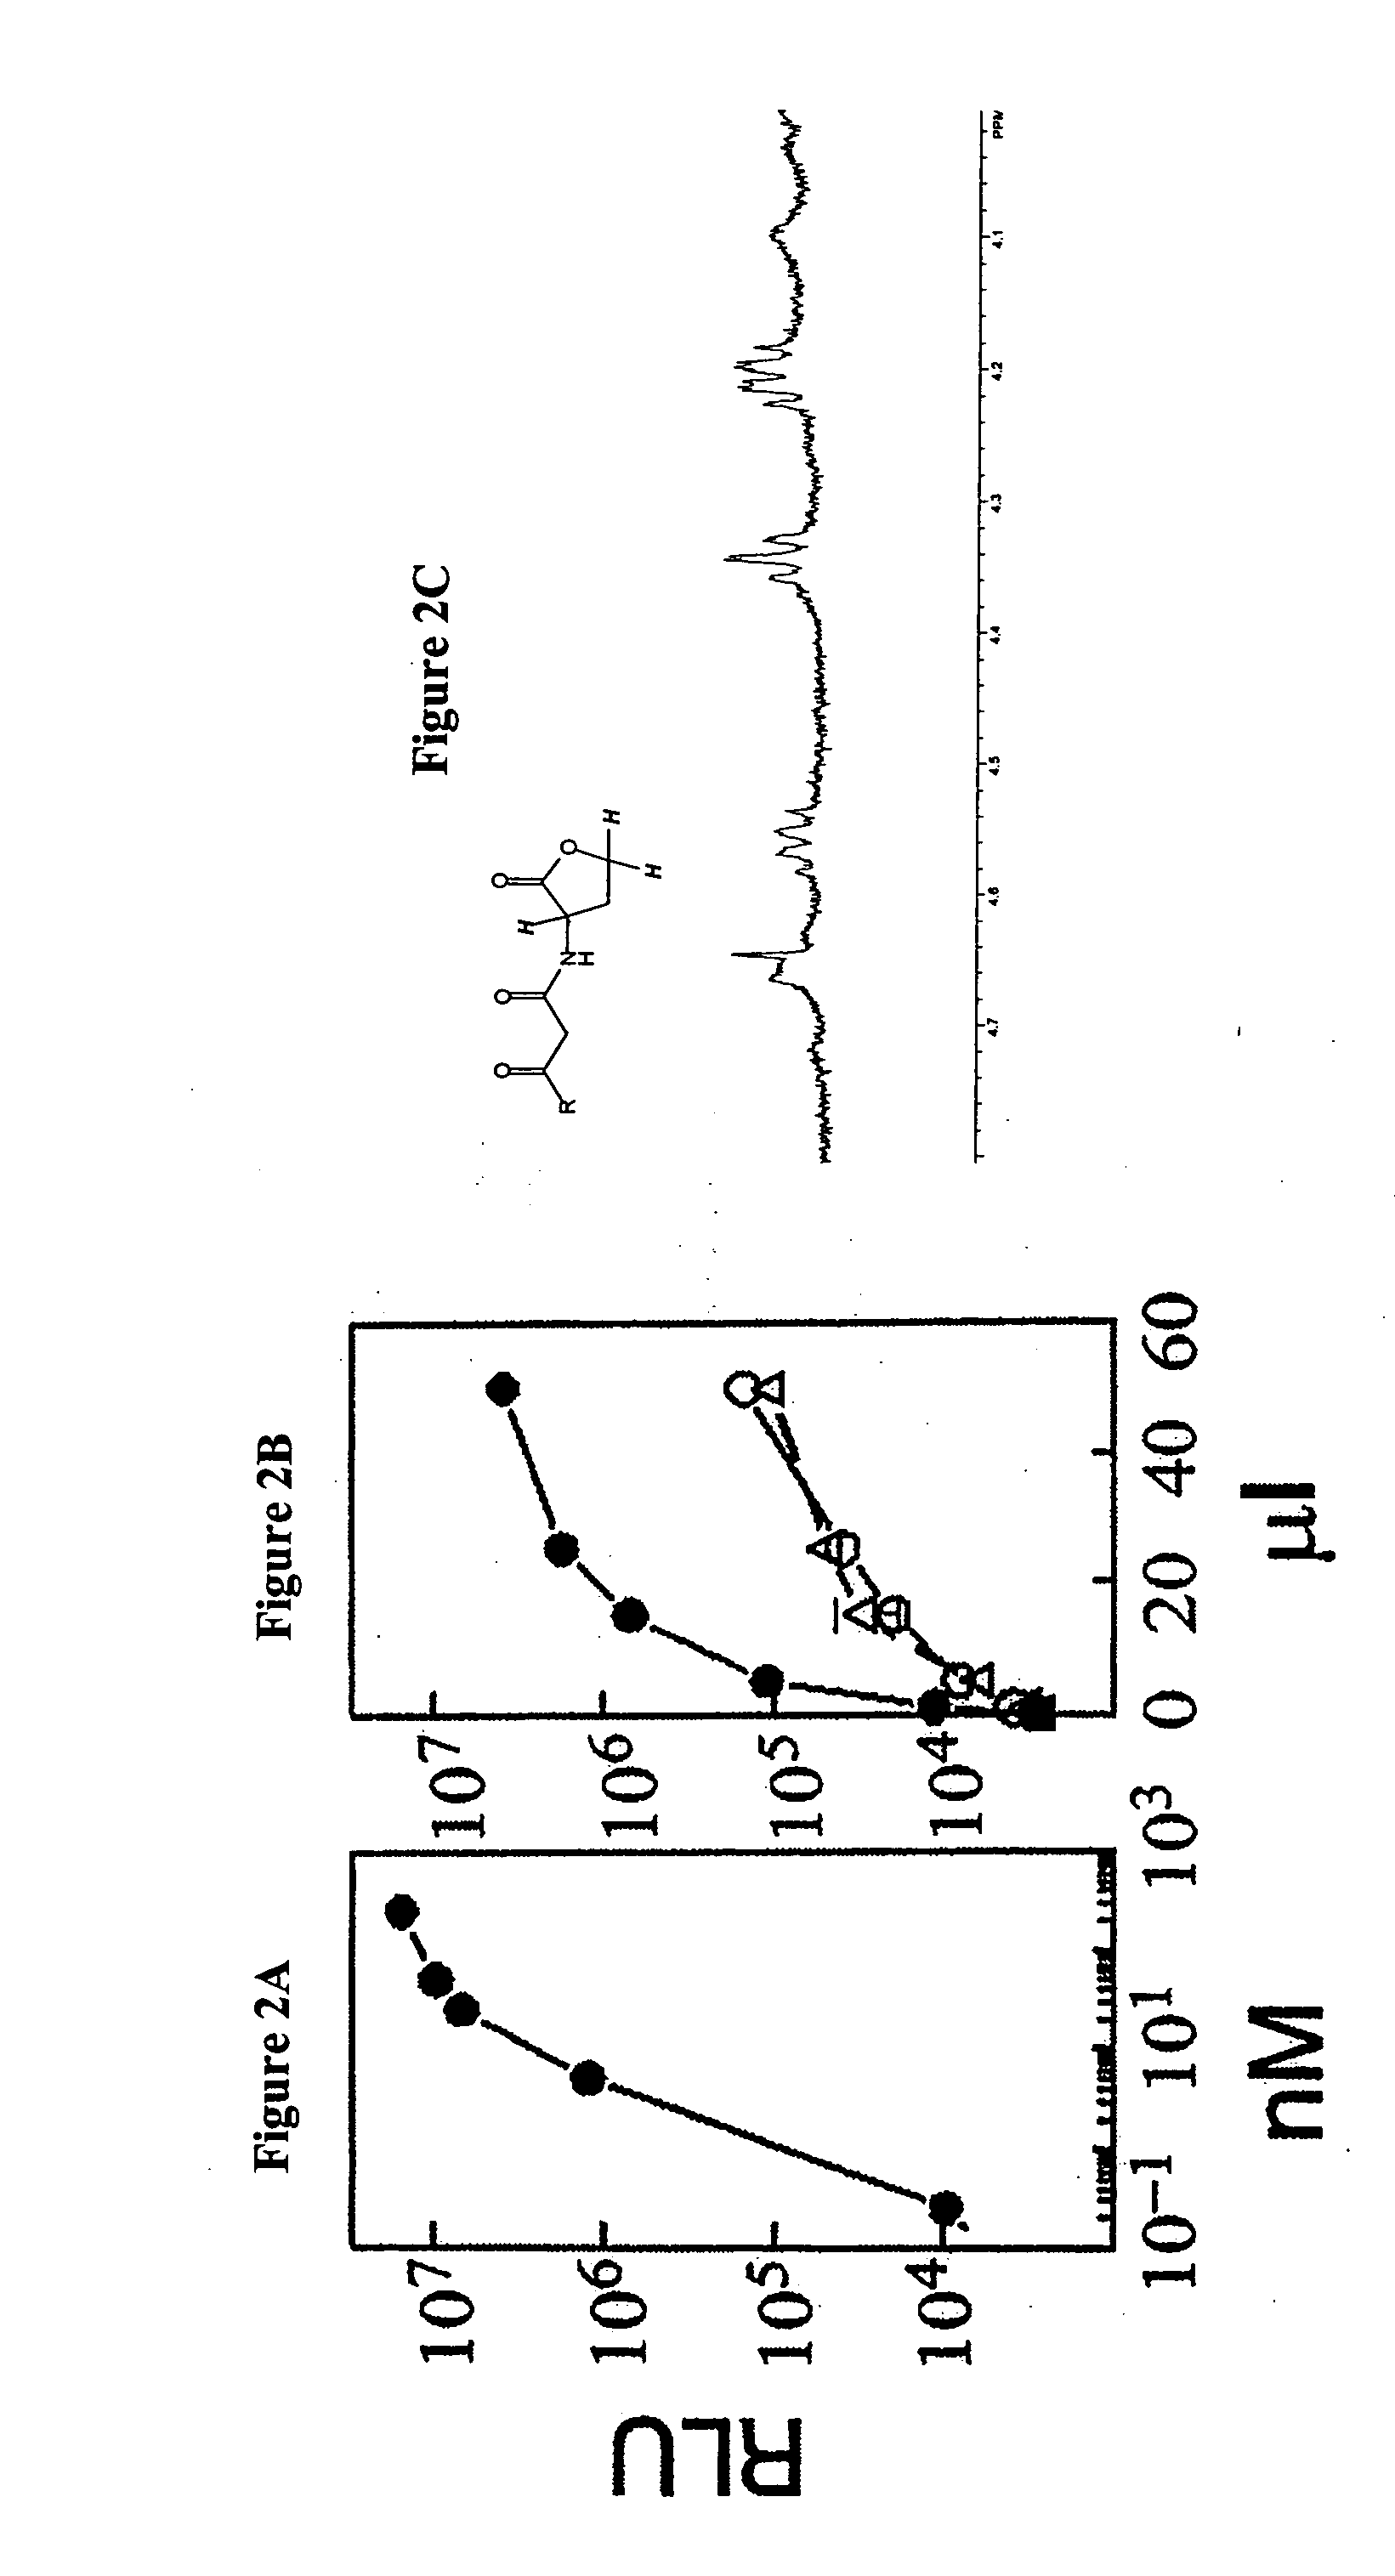 Acyl homoserine lactones for inhibition of cell growth